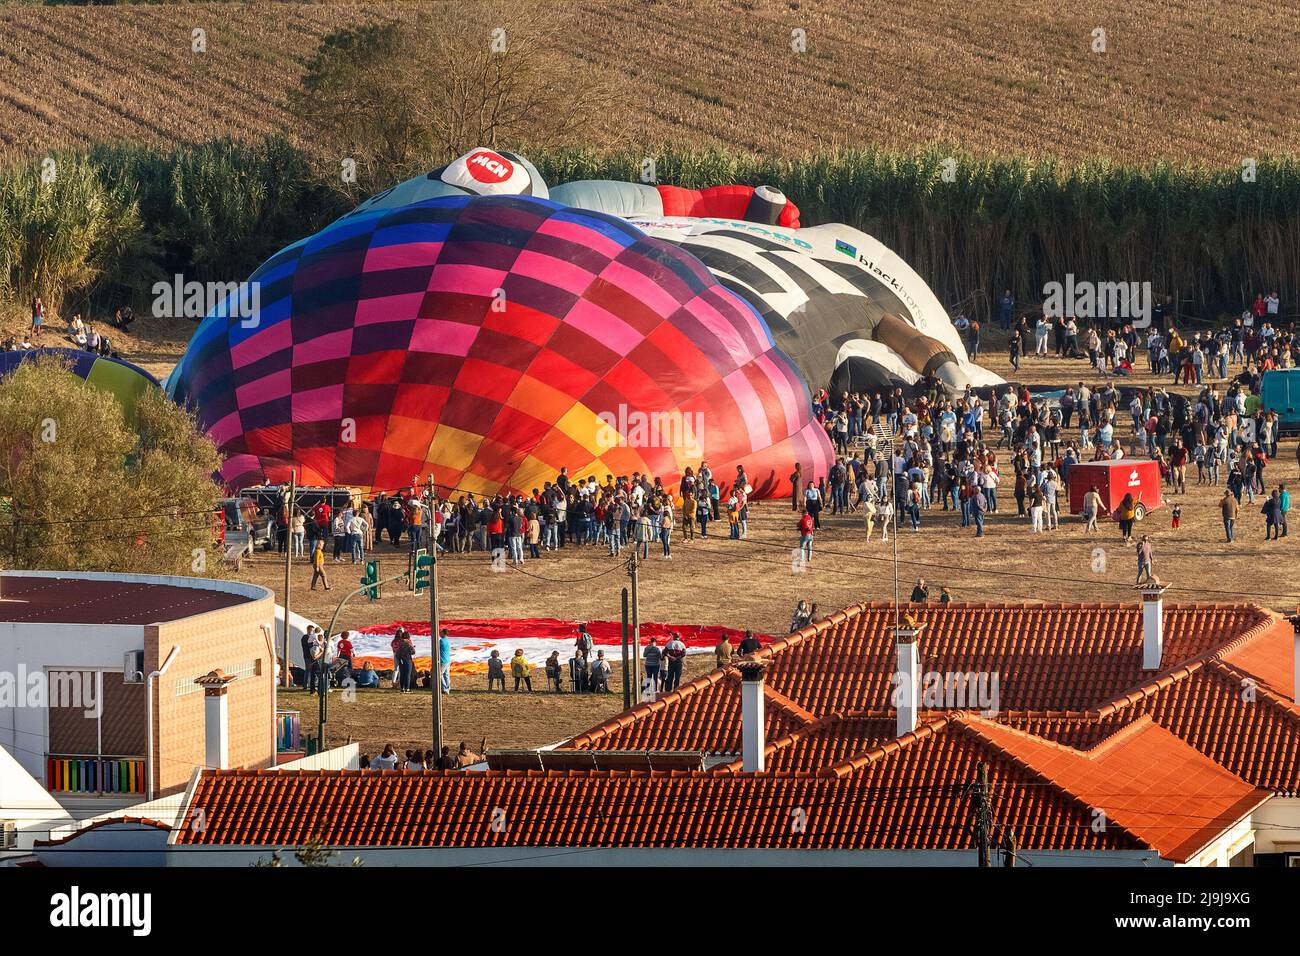 Coruche, Portugal - November 13, 2021: Hot air balloons being inflated at the Coruche International Ballooning Festival in Portugal. Stock Photo